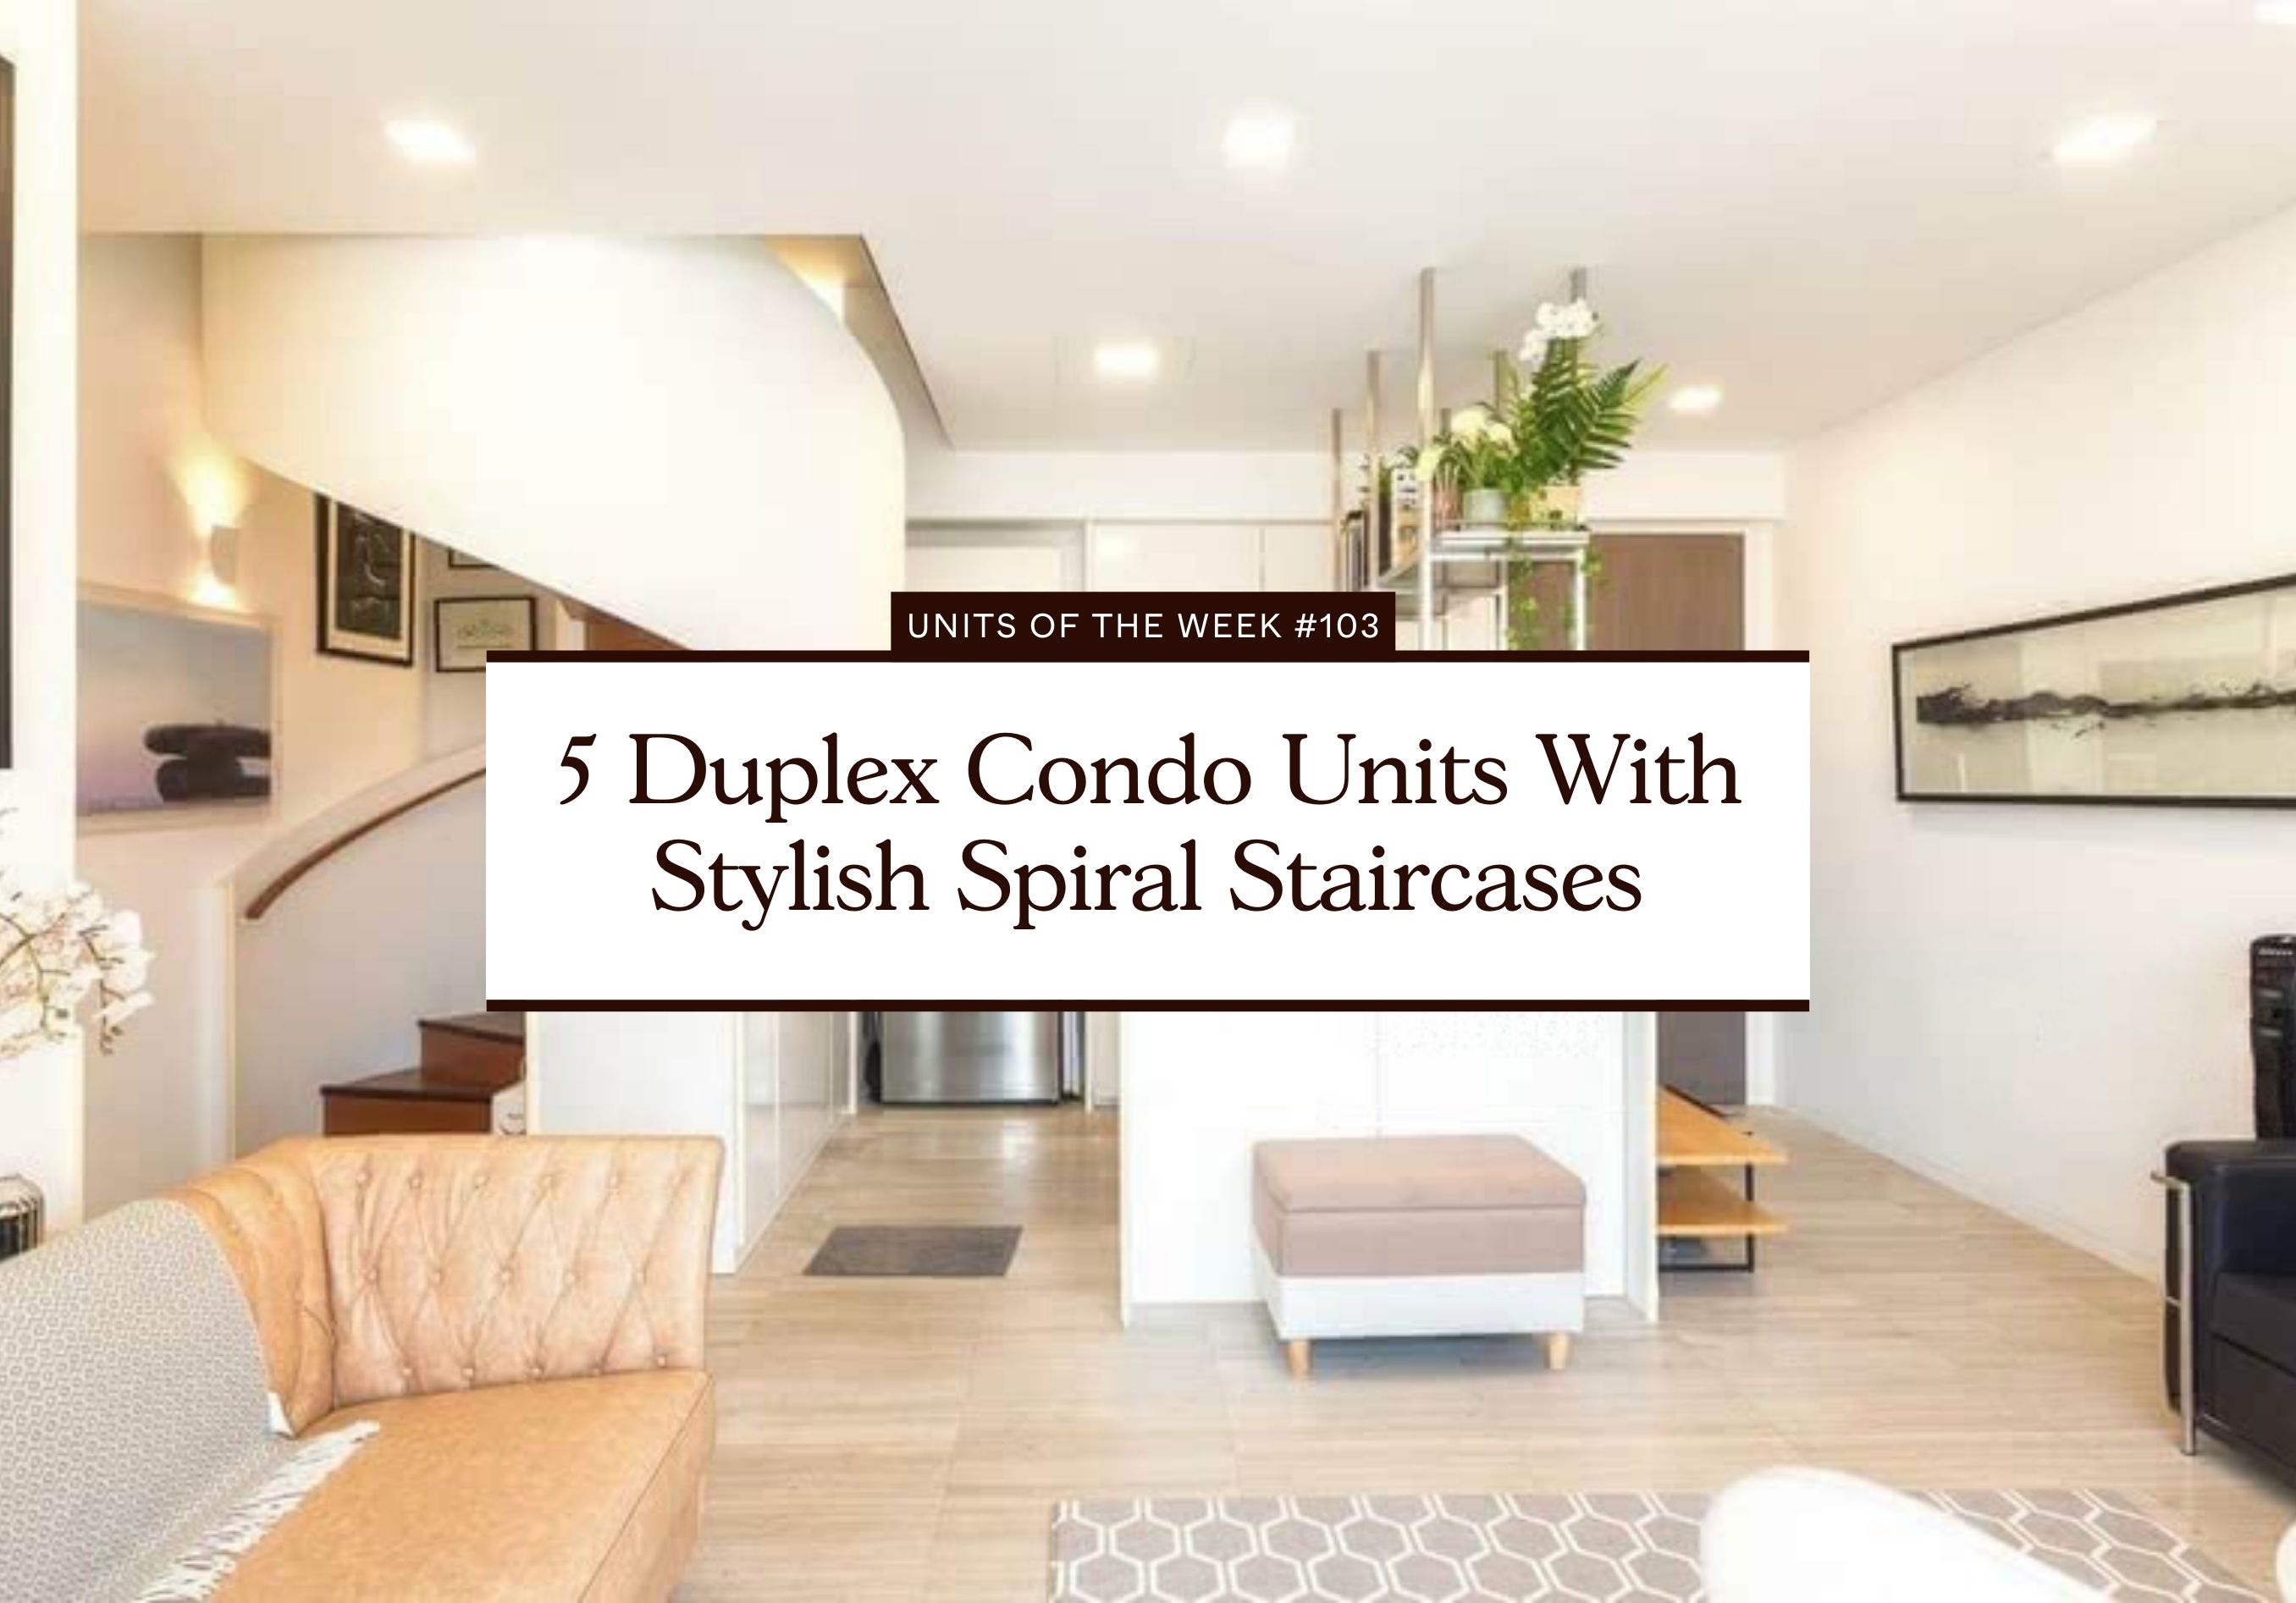 5 Duplex Condo Units With Stylish Spiral Staircases